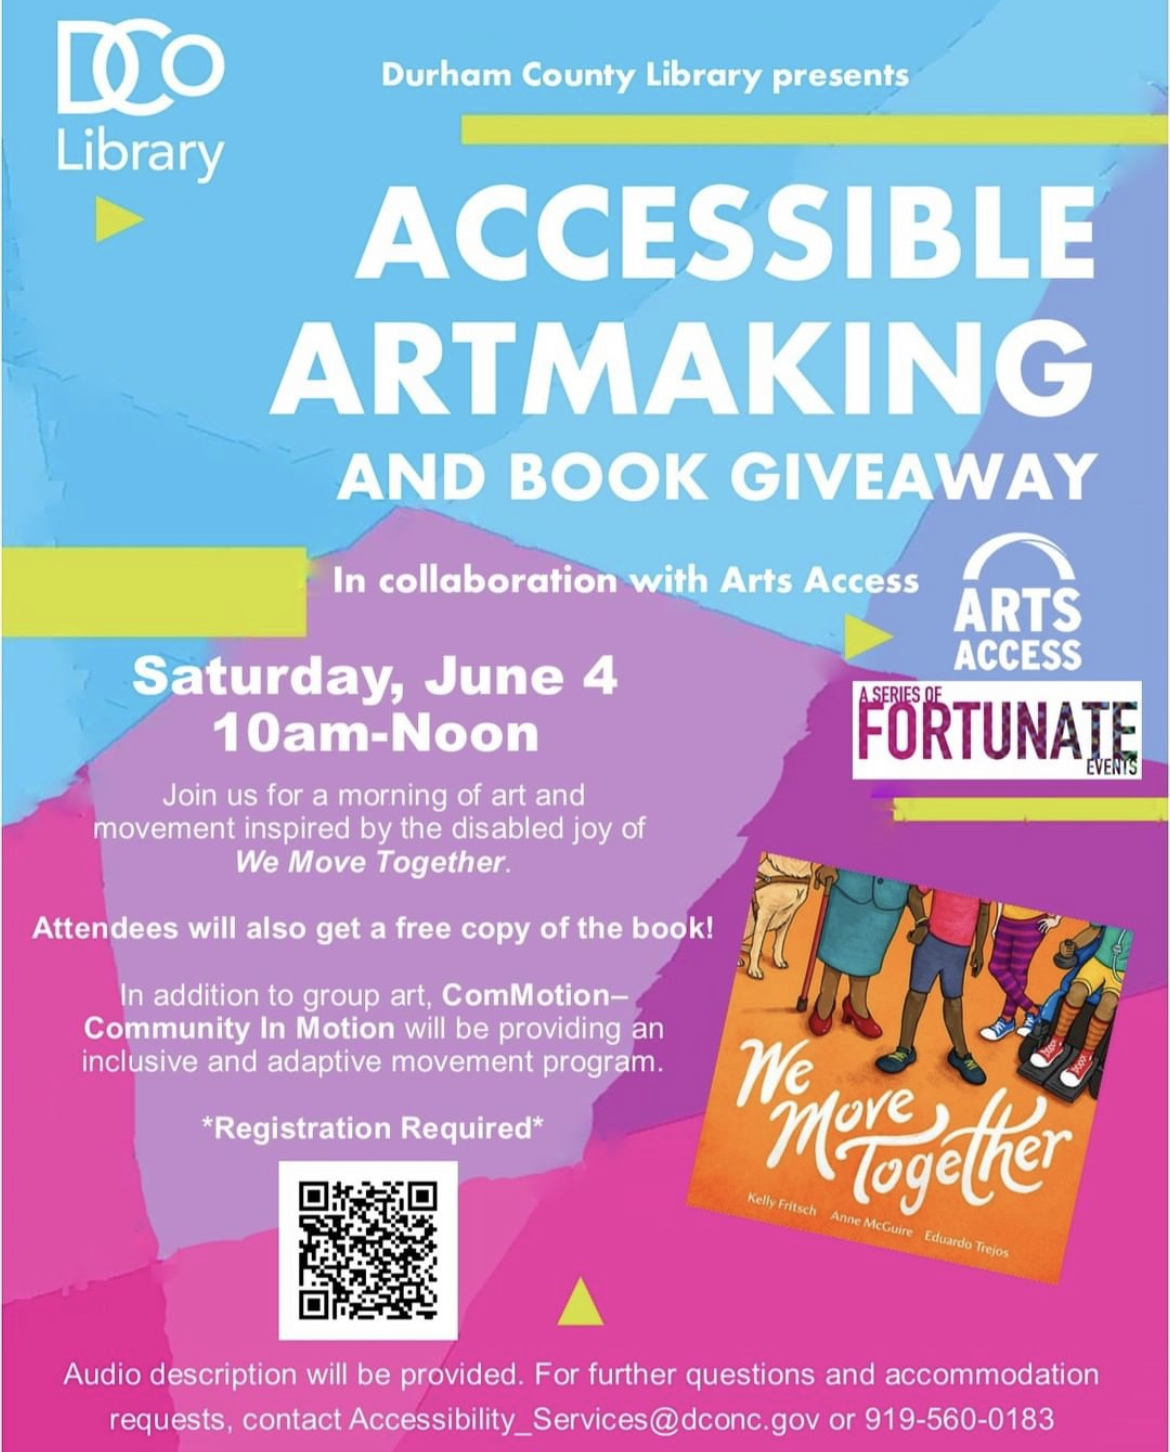 ID: Text on graphic reads, “Durham County Library Presents Accessible Artmaking and Book Giveaway in collaboration with Arts Access. Saturday, June 4 10am-Noon. Join us for a morning of art and movement inspired by the disabled joy of We Move Together. Attendees will also get a free copy of the book! In addition to group art, ComMotion—Community in Motion will be providing an inclusive and adaptive movement program. *Registration Required. Audio description will be provided. For further questions and accommodation requests, contact Accessibility_Services@dconc.gov or (919) 560-0183